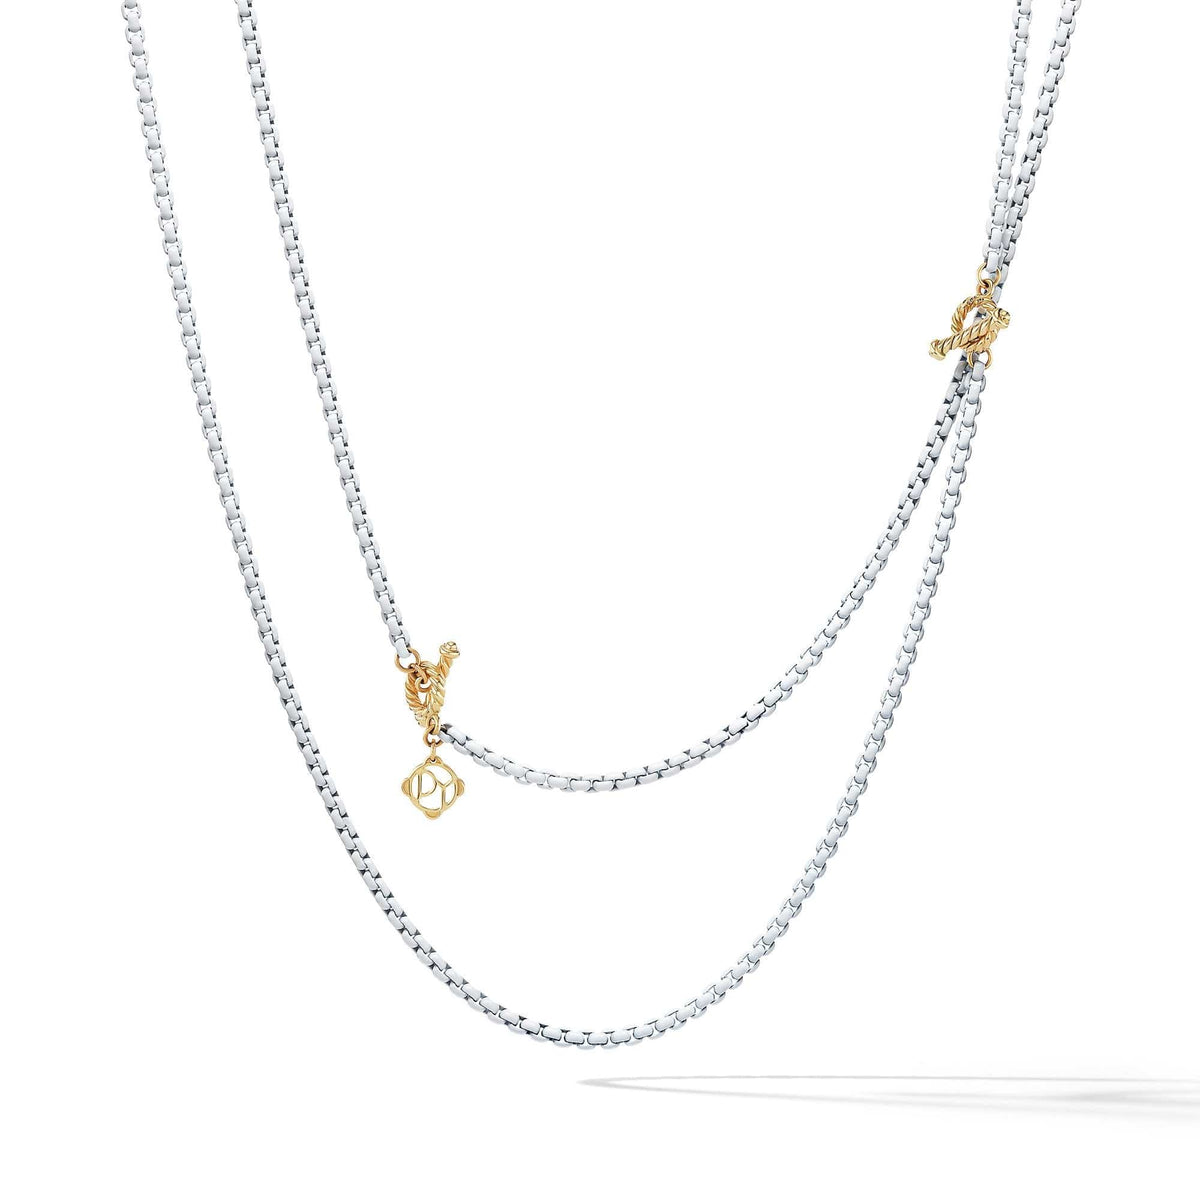 DY Bel Aire Chain Necklace in White with 14K Gold Accents